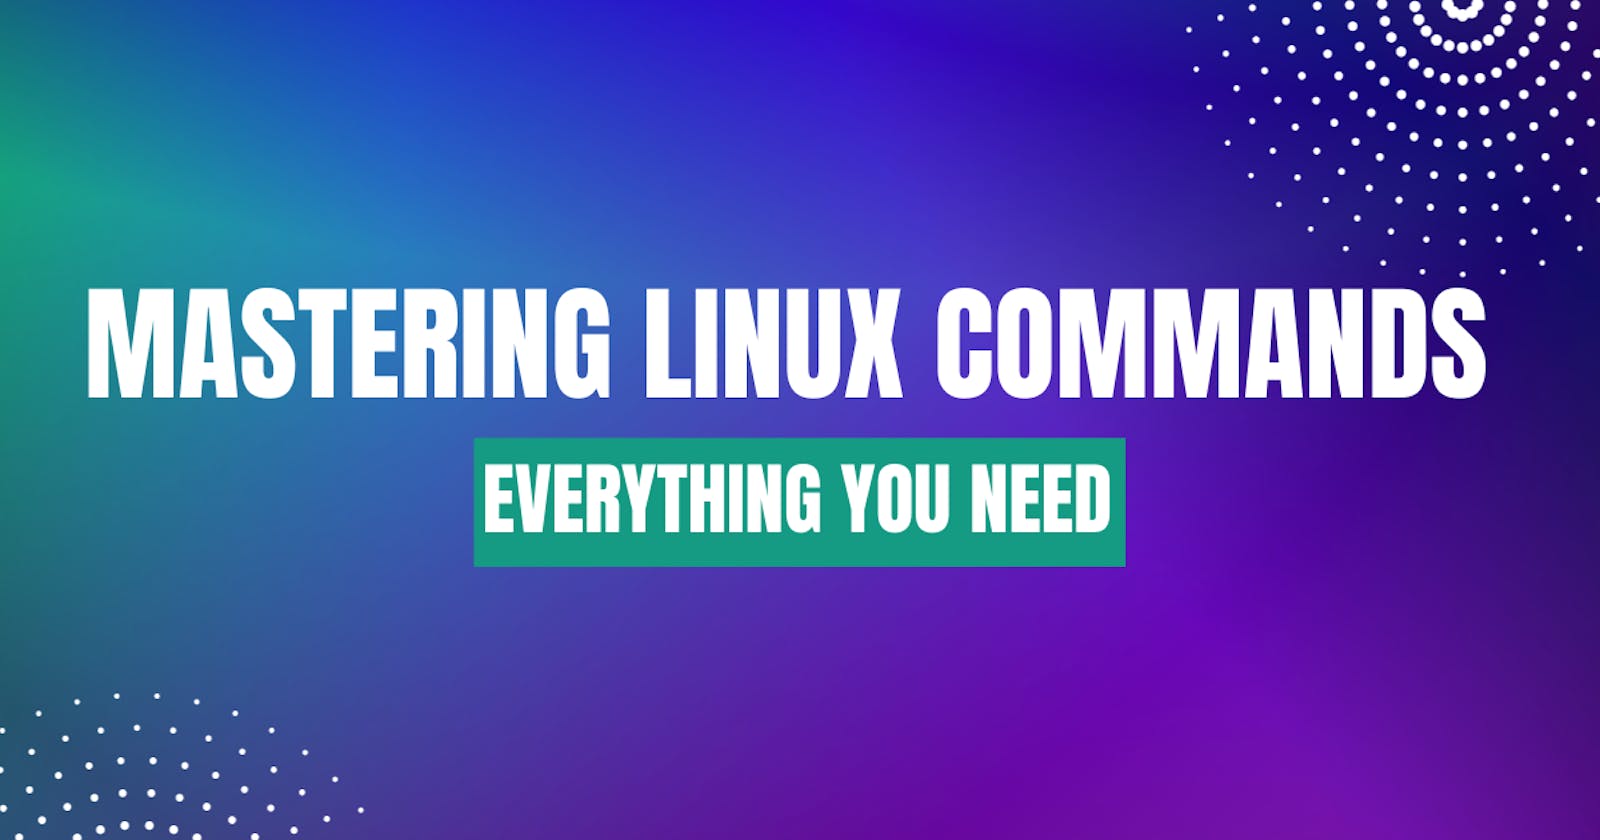 Mastering Linux Commands: A Guide with Examples